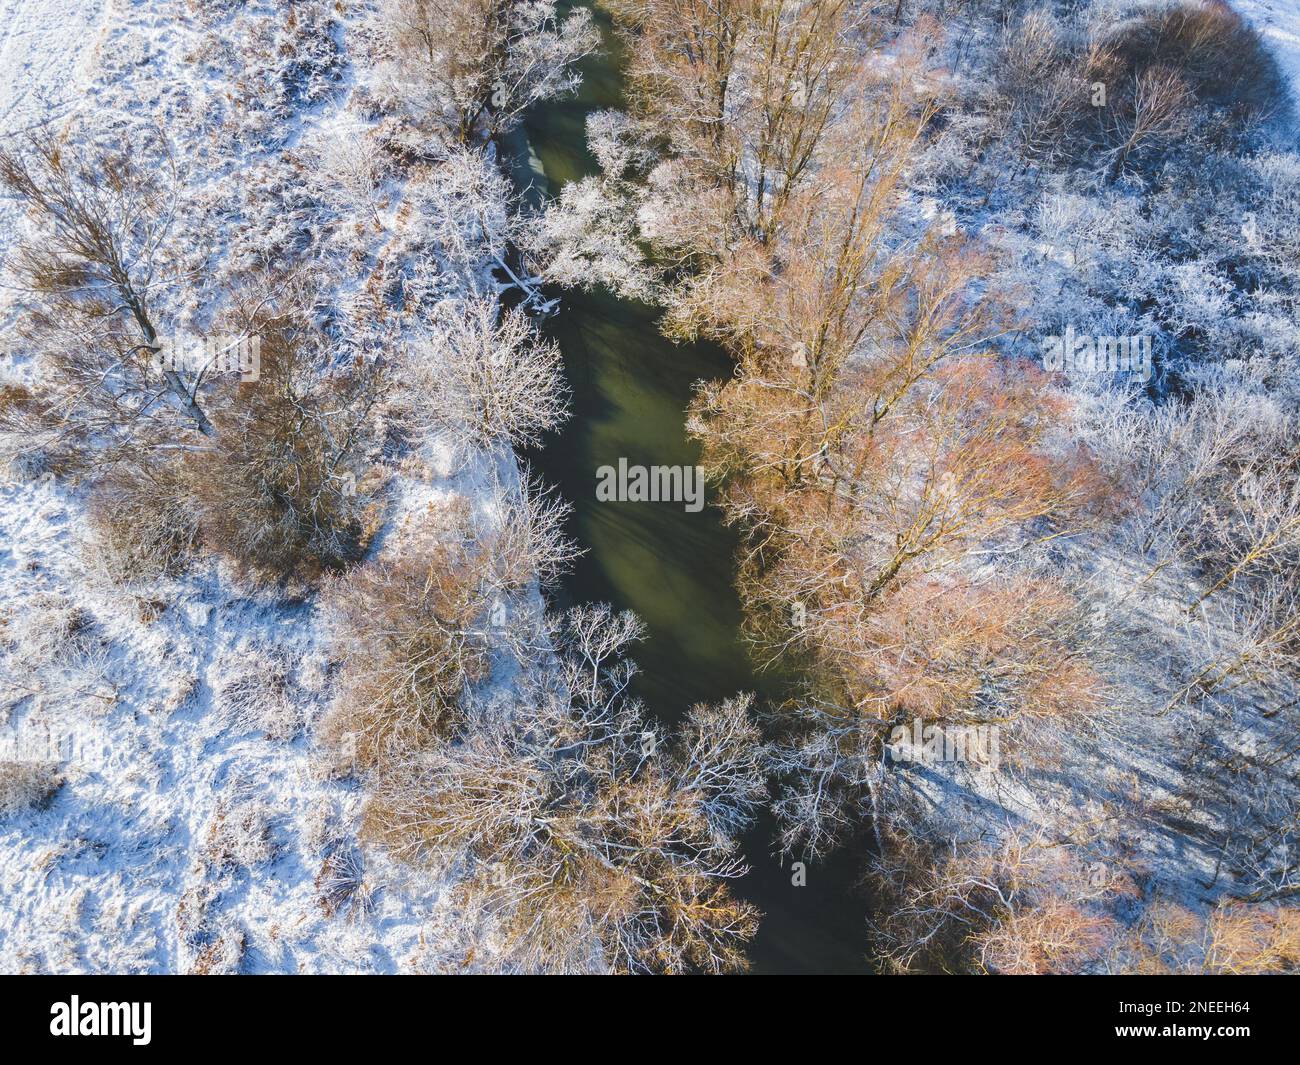 Aerial view of the Ipoly river in December in a snowy environment, Balassagyarmat, Hungary Stock Photo